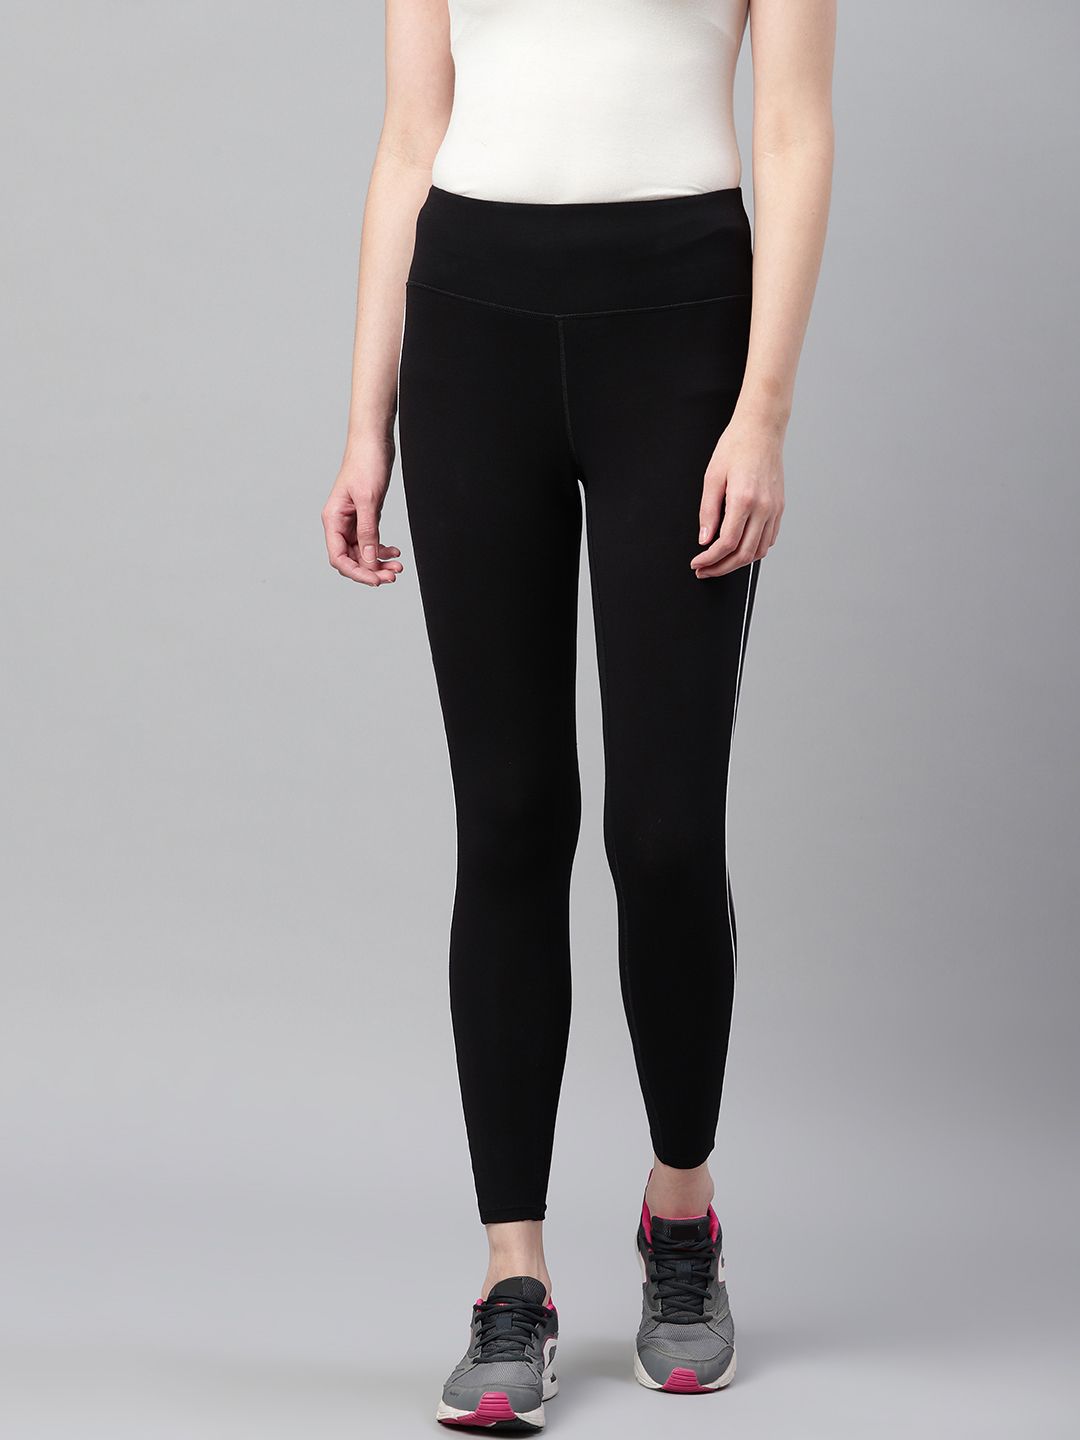 Marks & Spencer Women Black Solid Tights Price in India